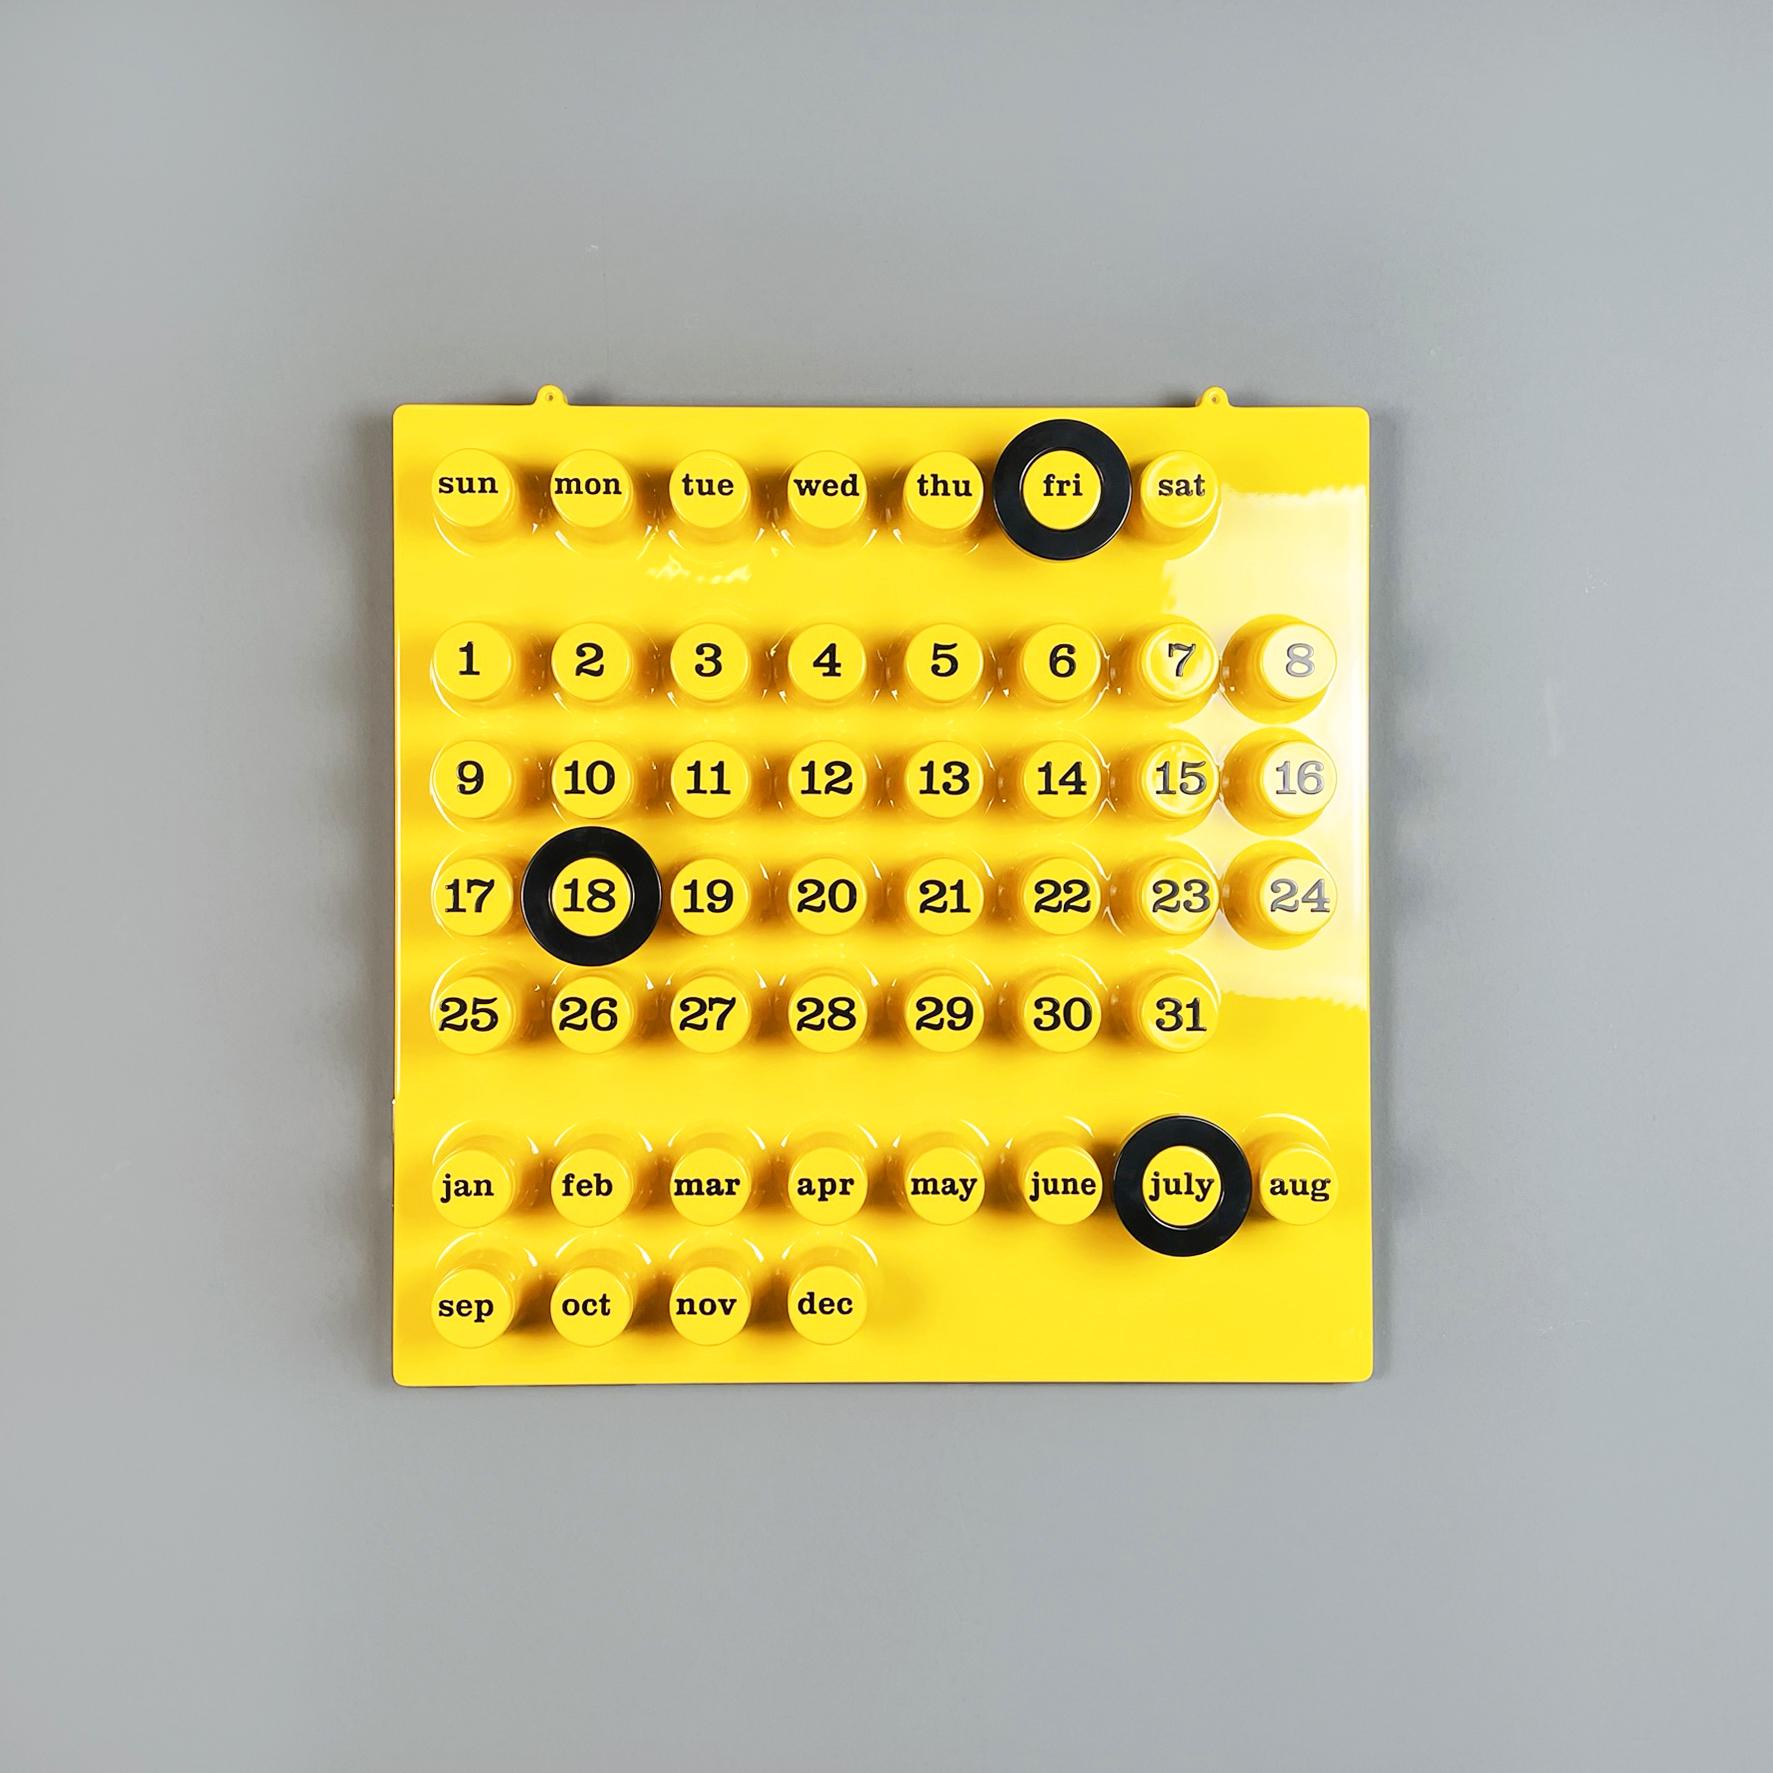 Italian postmodern Wall perpetual calendar by Giorgio Della Beffa for Ring A Date, 2000-2010s
Iconic and elegant wall perpetual calendar in yellow plastic. The calendar has several protruding cylinders: these correspond to the days of the week in